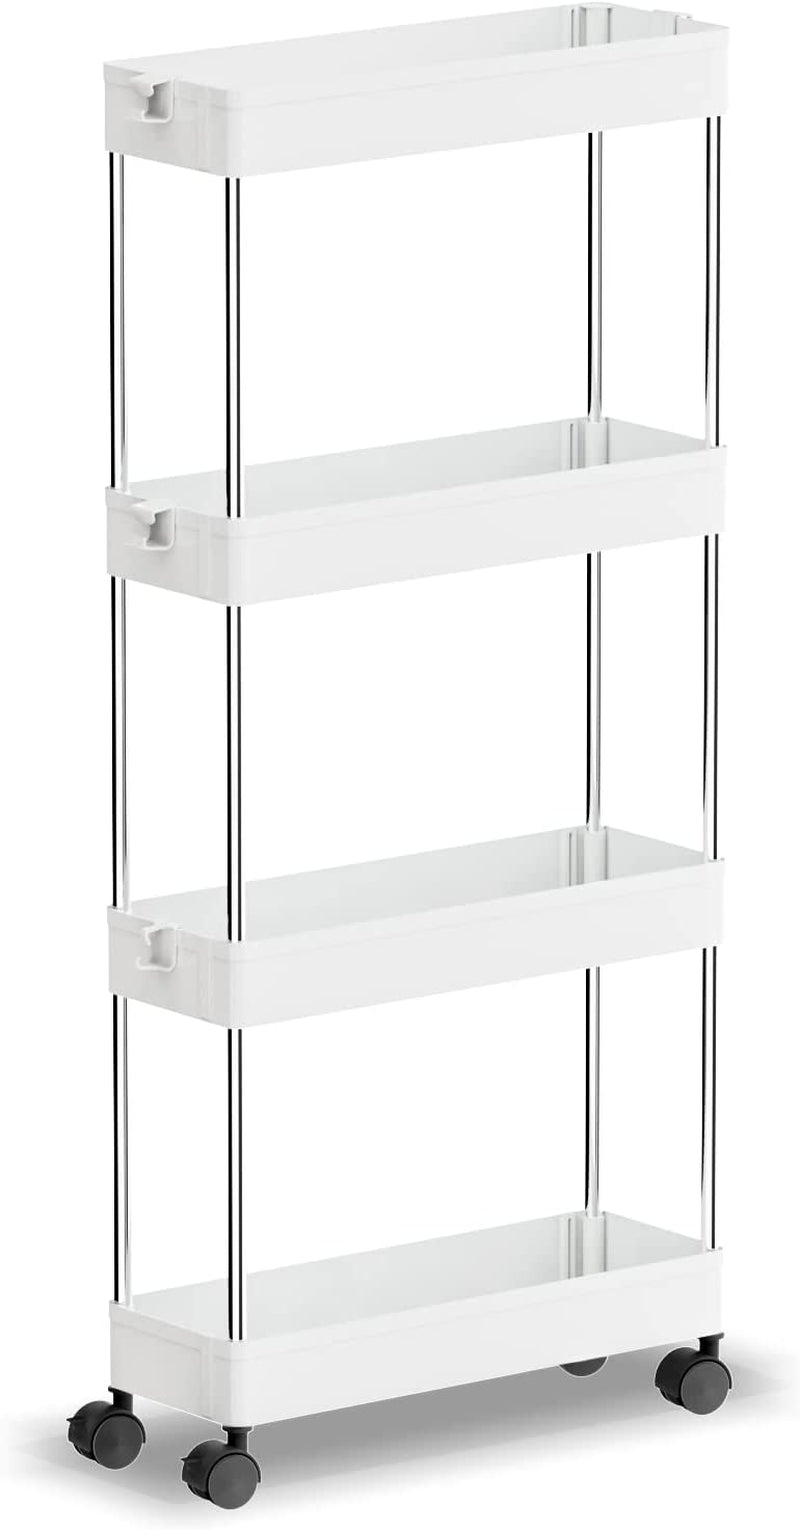 OTK Slim Storage Cart 3 Tier Mobile Shelving Unit Organizer, Utility Rolling Shelf Cart with Wheels for Bathroom Kitchen Bedroom Office Laundry Narrow Places，White Home & Garden > Household Supplies > Storage & Organization OTK 4 Tier-White Slim 